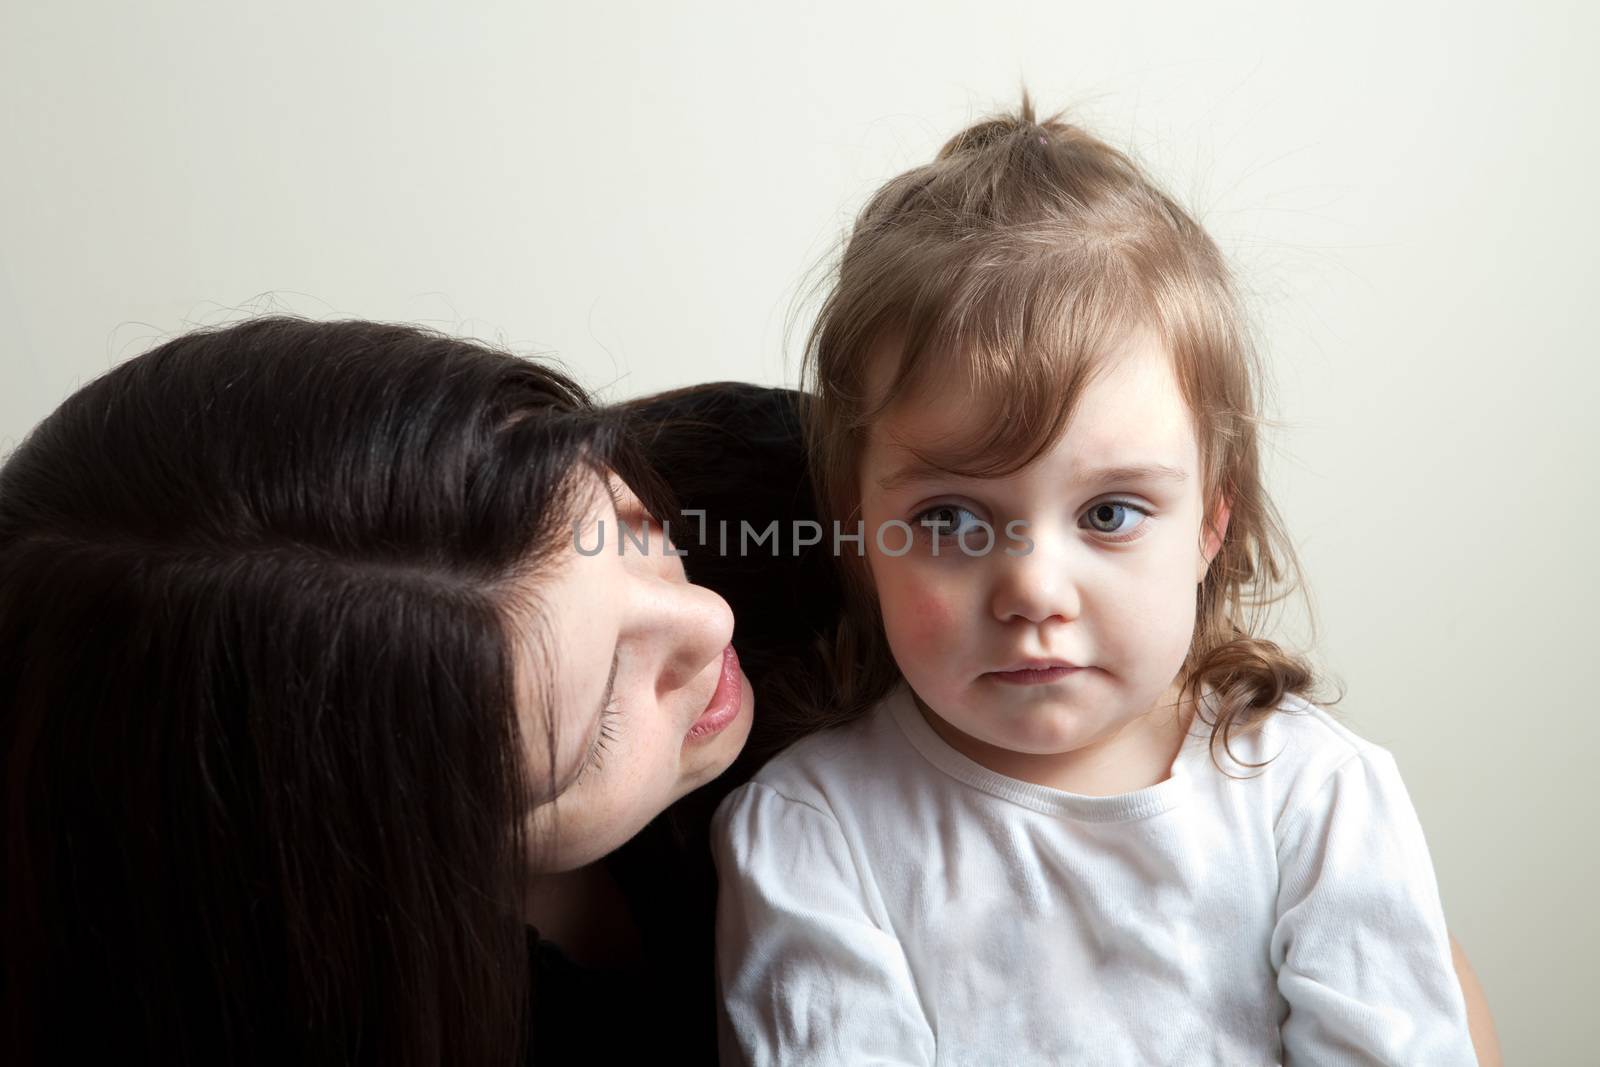 Toddler age girl getting spoken to by her mother. Great parenting concept image.